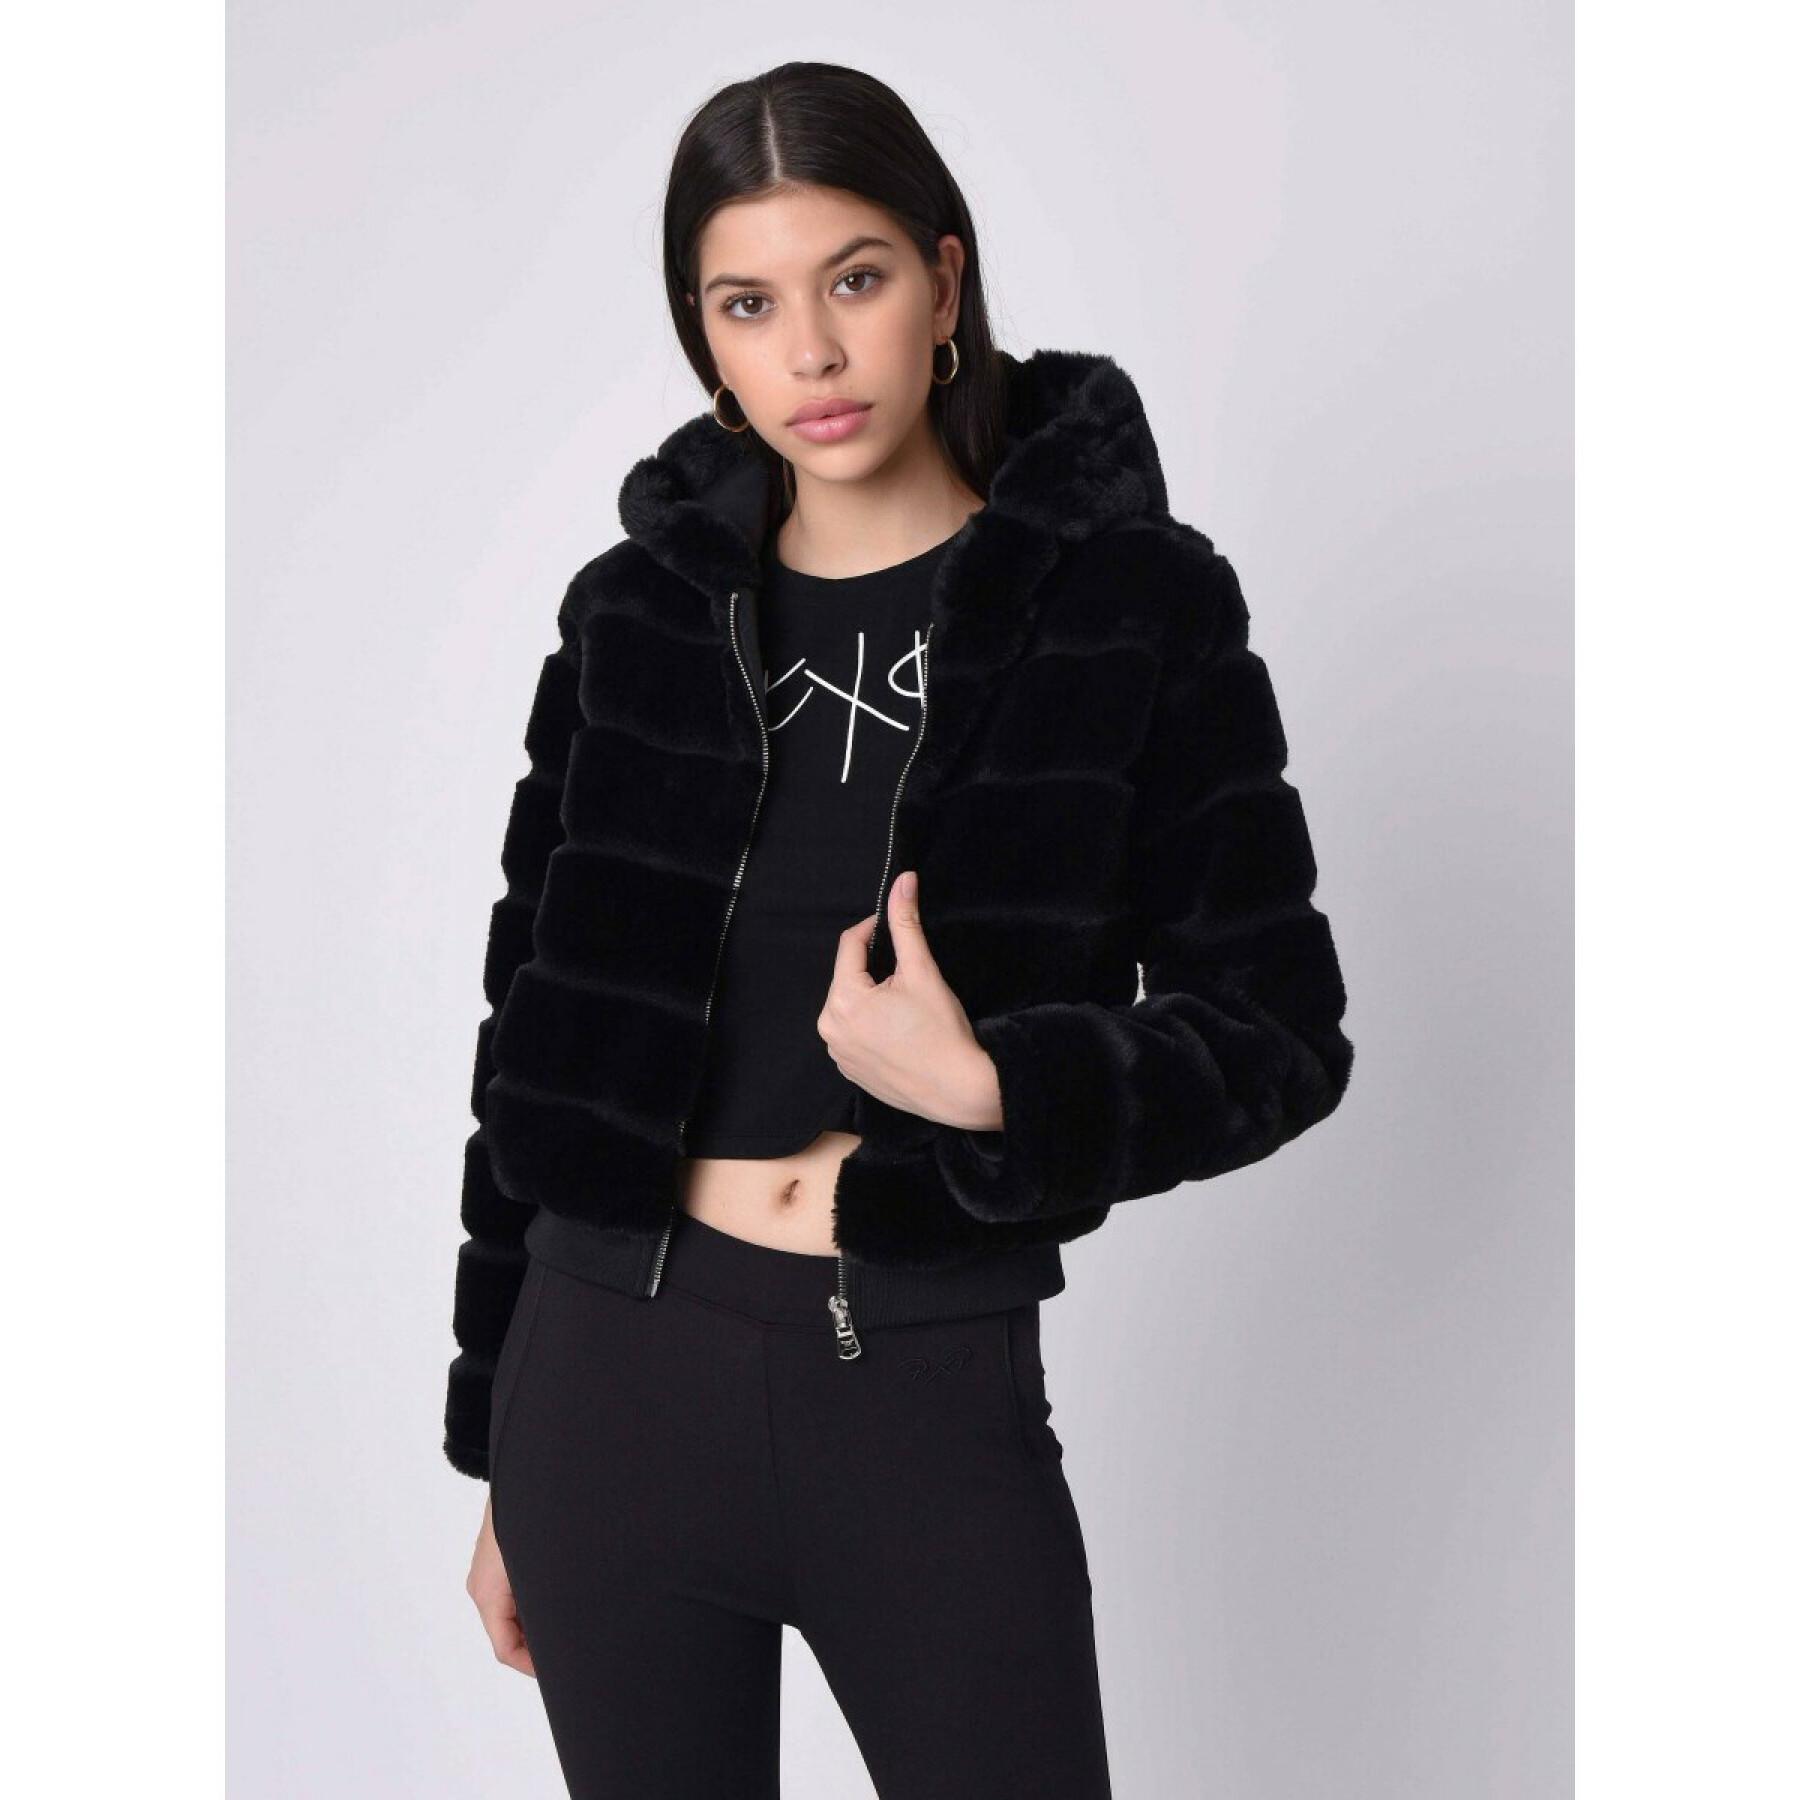 Short jacket with hood in imitation fur for women Project X Paris